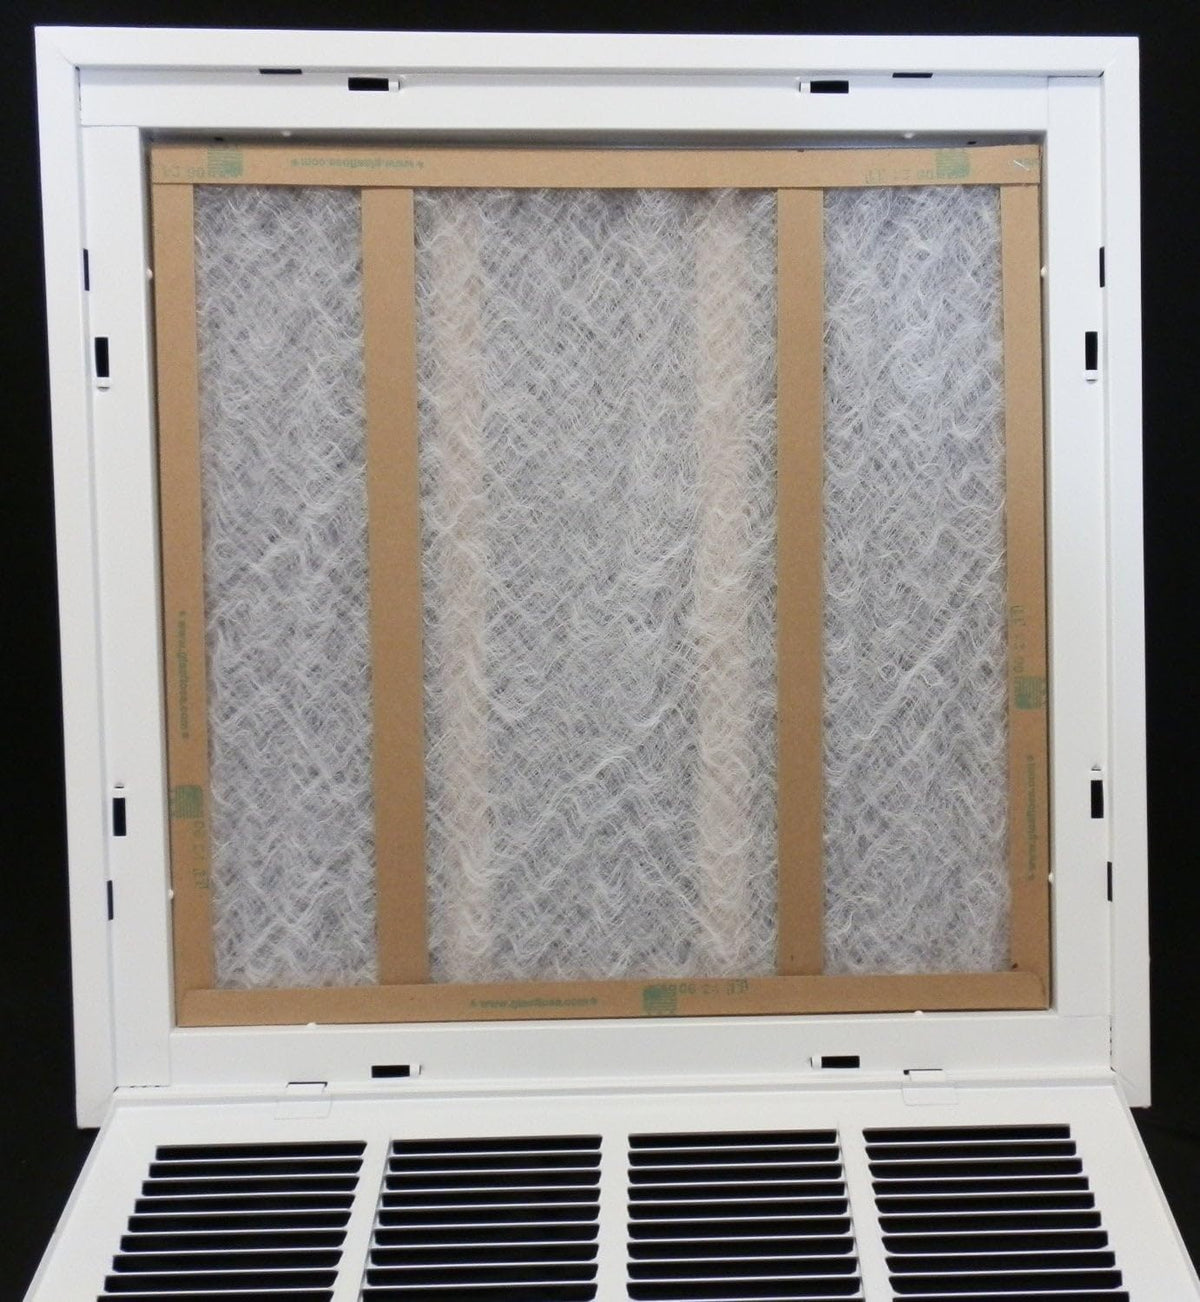 24&quot; X 12&quot; Steel Return Air Filter Grille for 1&quot; Filter - Fixed Hinged - [Outer Dimensions: 26 5/8&quot; X 14 5/8&quot;]